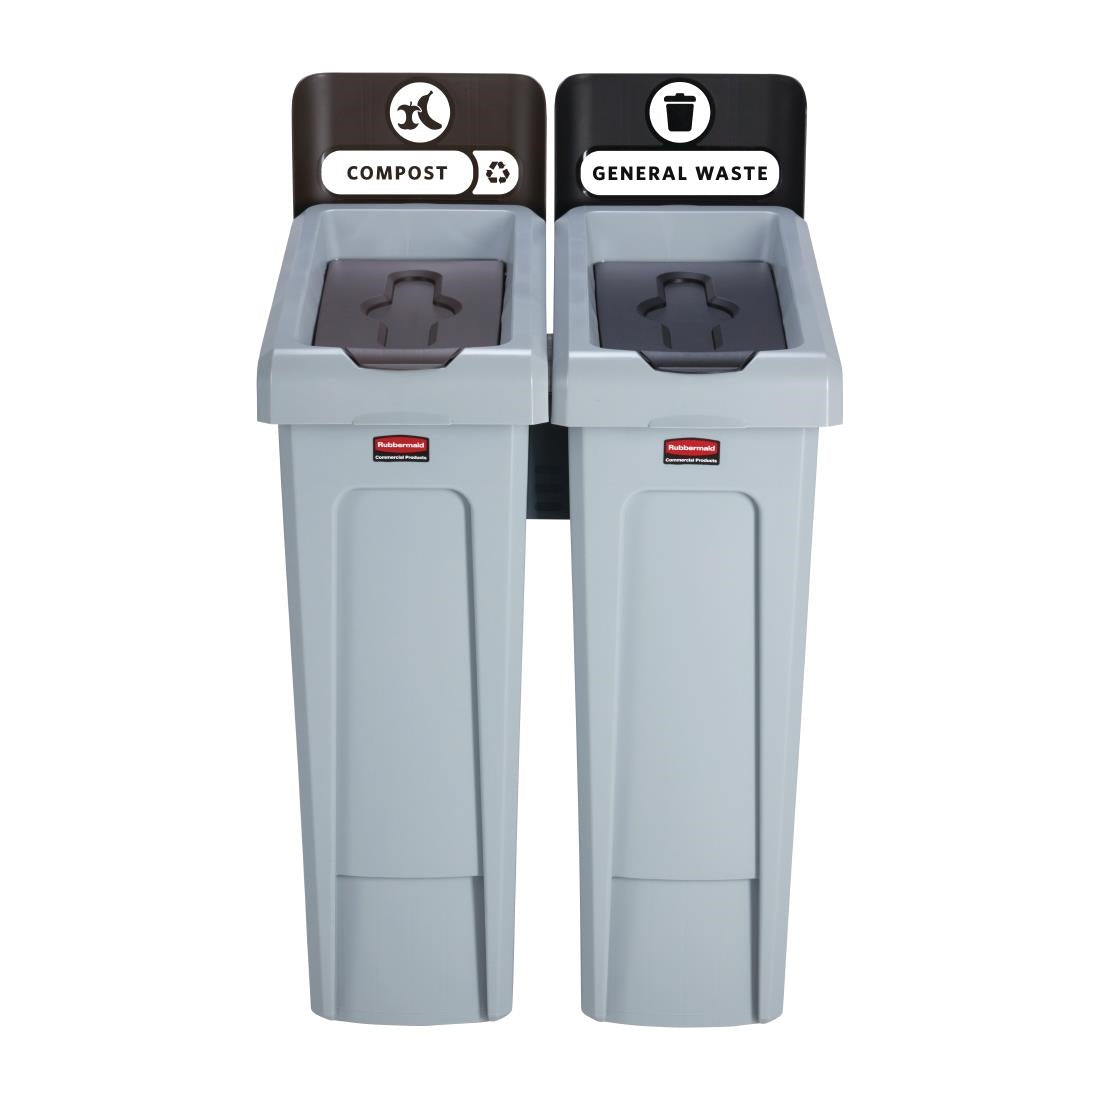 DY079 Rubbermaid Slim Jim Two Stream Recycling Station 87Ltr